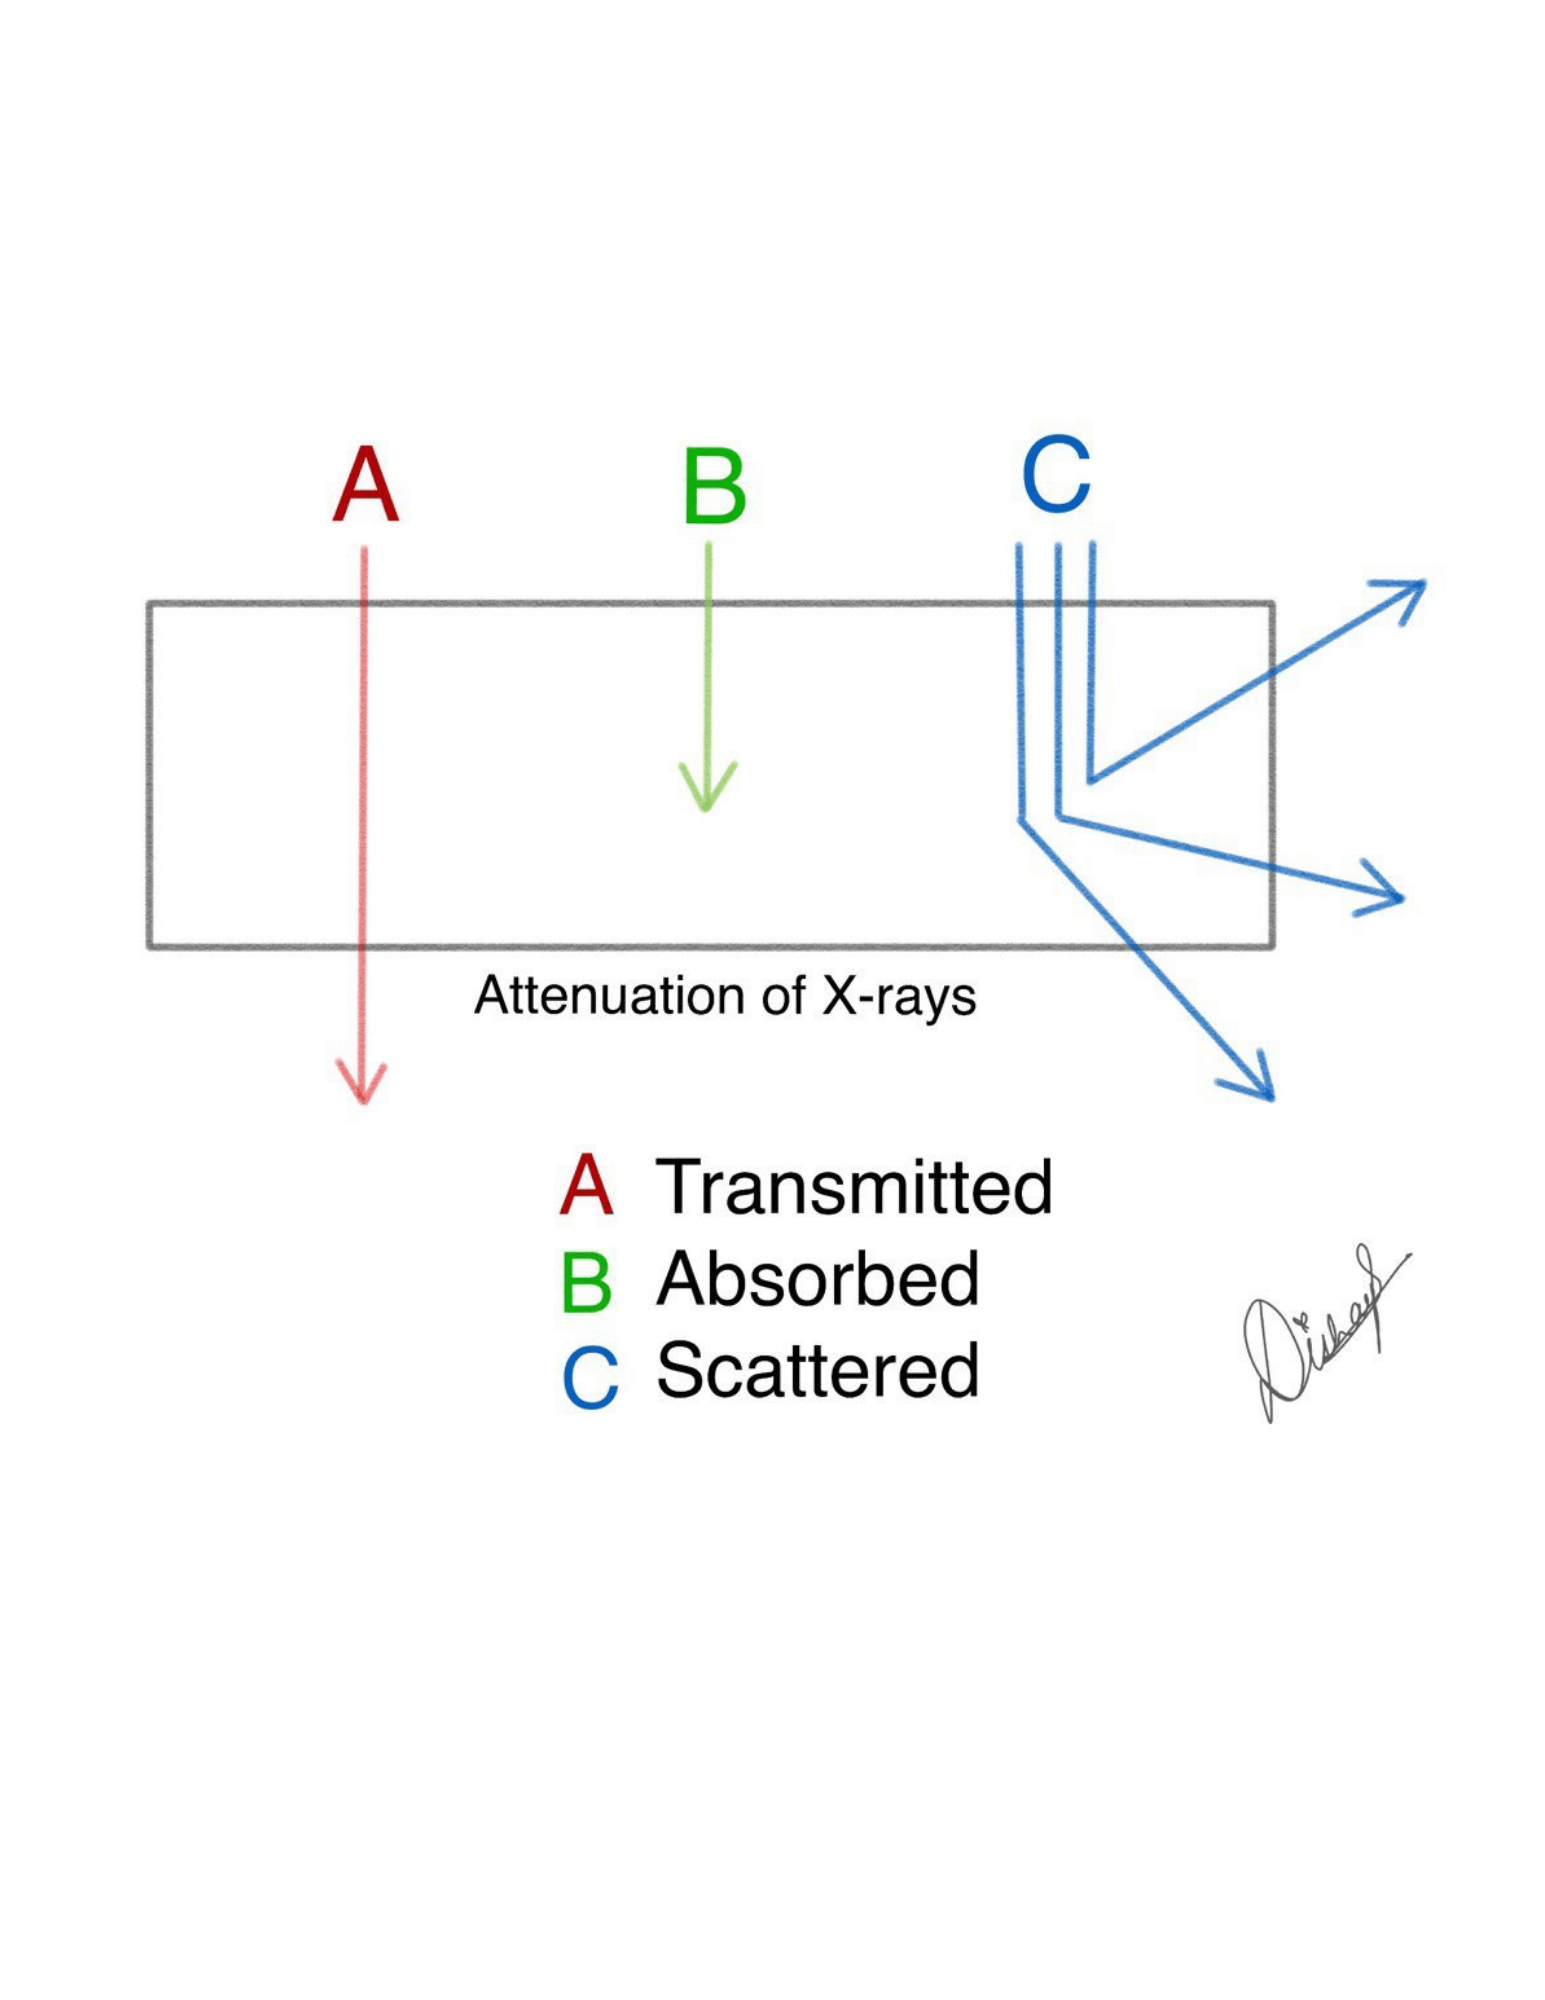 Attenuation of X-rays in Matter